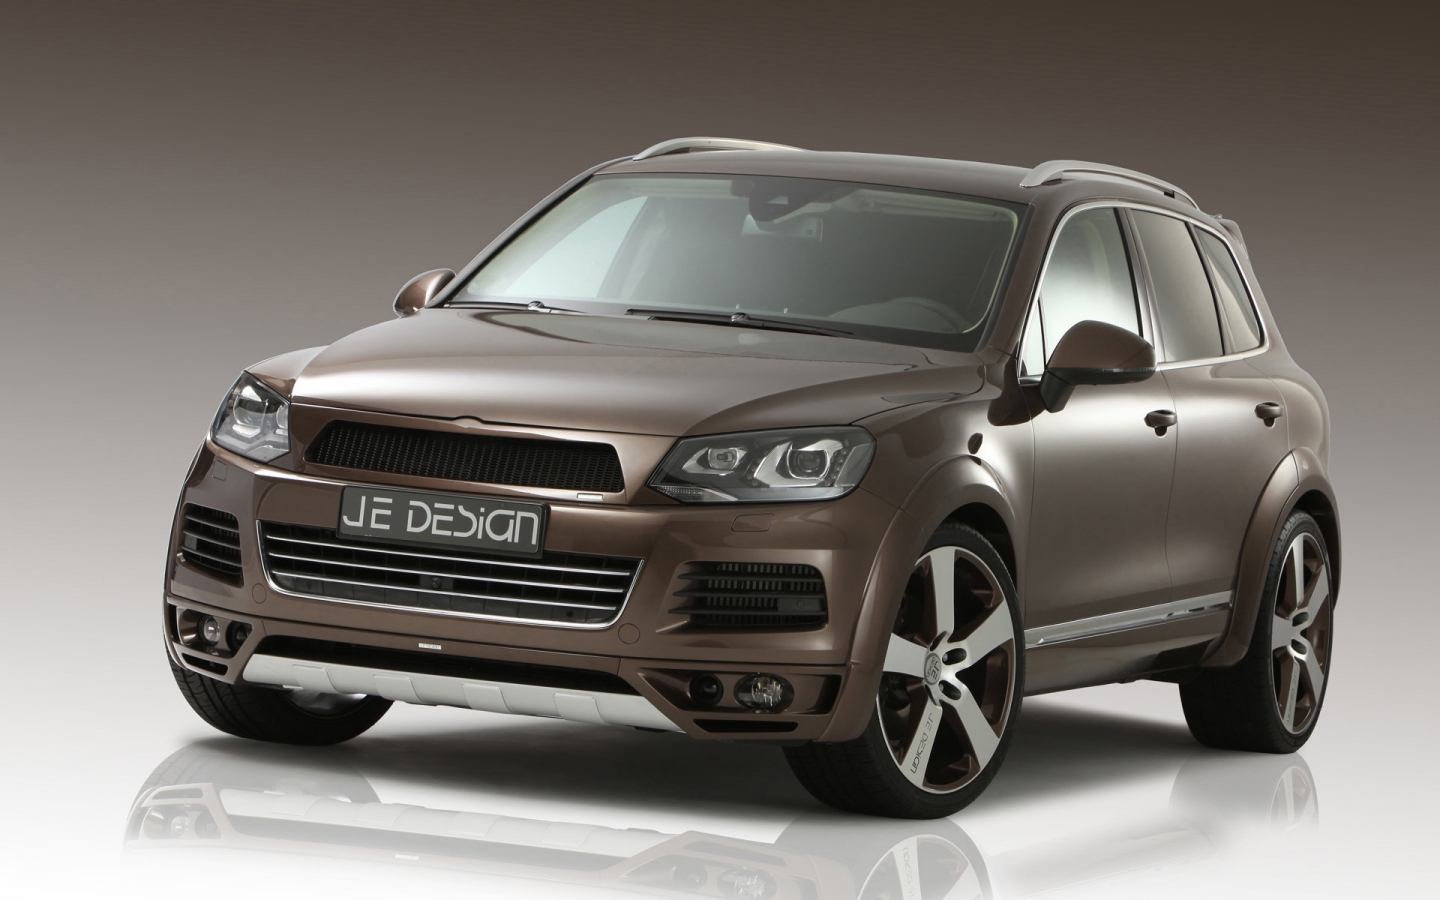 JE Design Volkswagen Touareg Front Angle for 1440 x 900 widescreen resolution